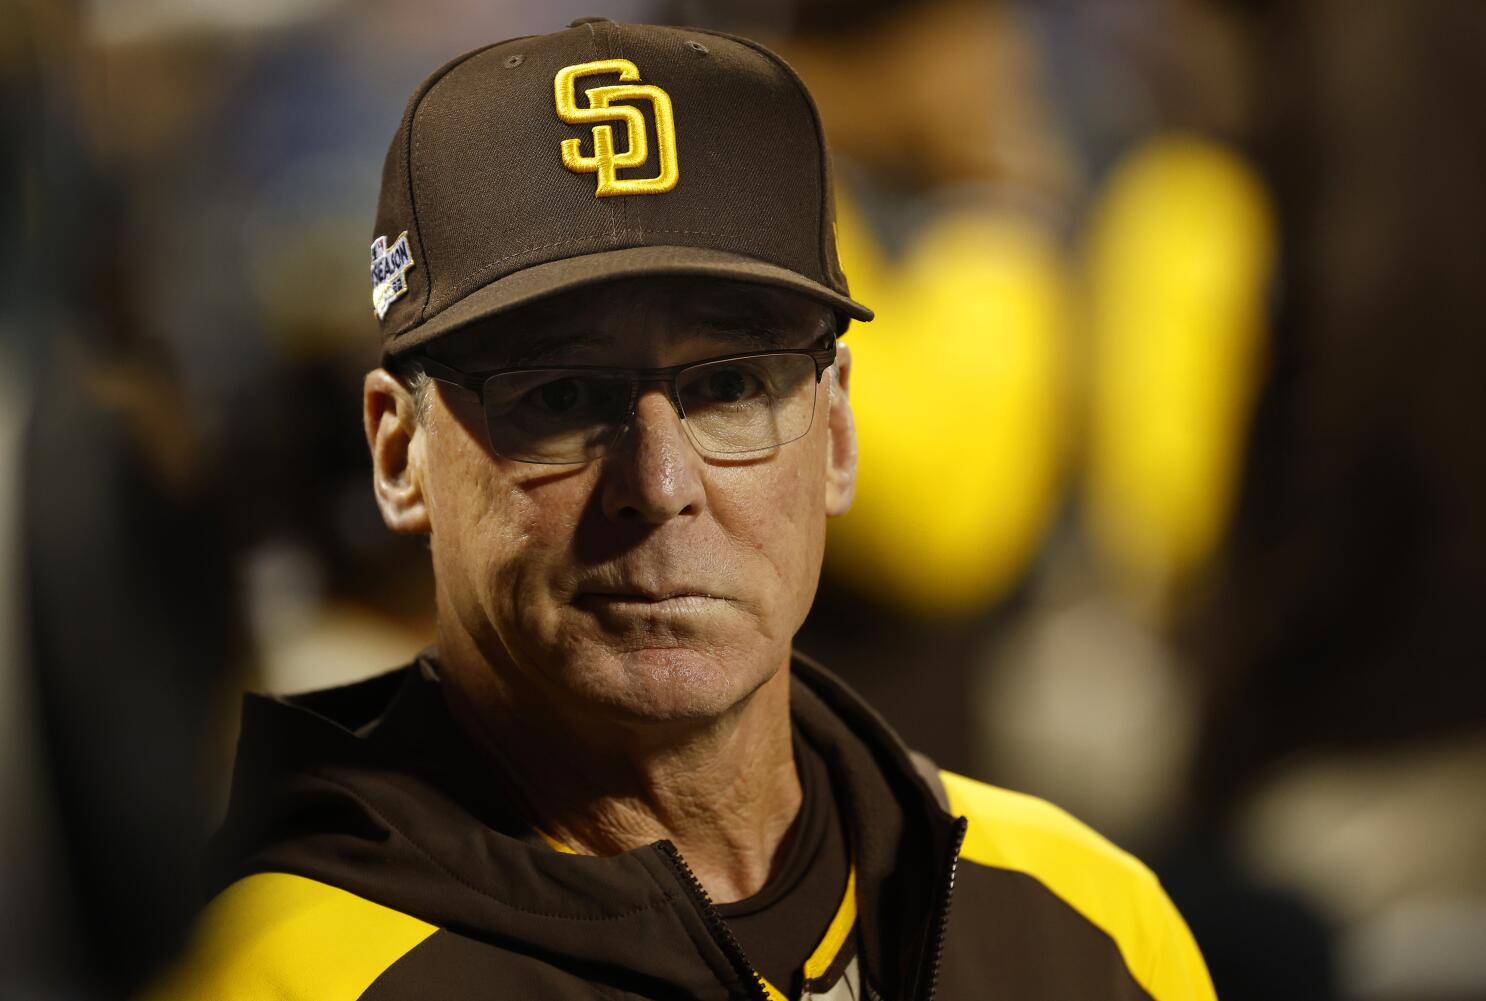 Giants' manager search: Internal candidates and external possibilities